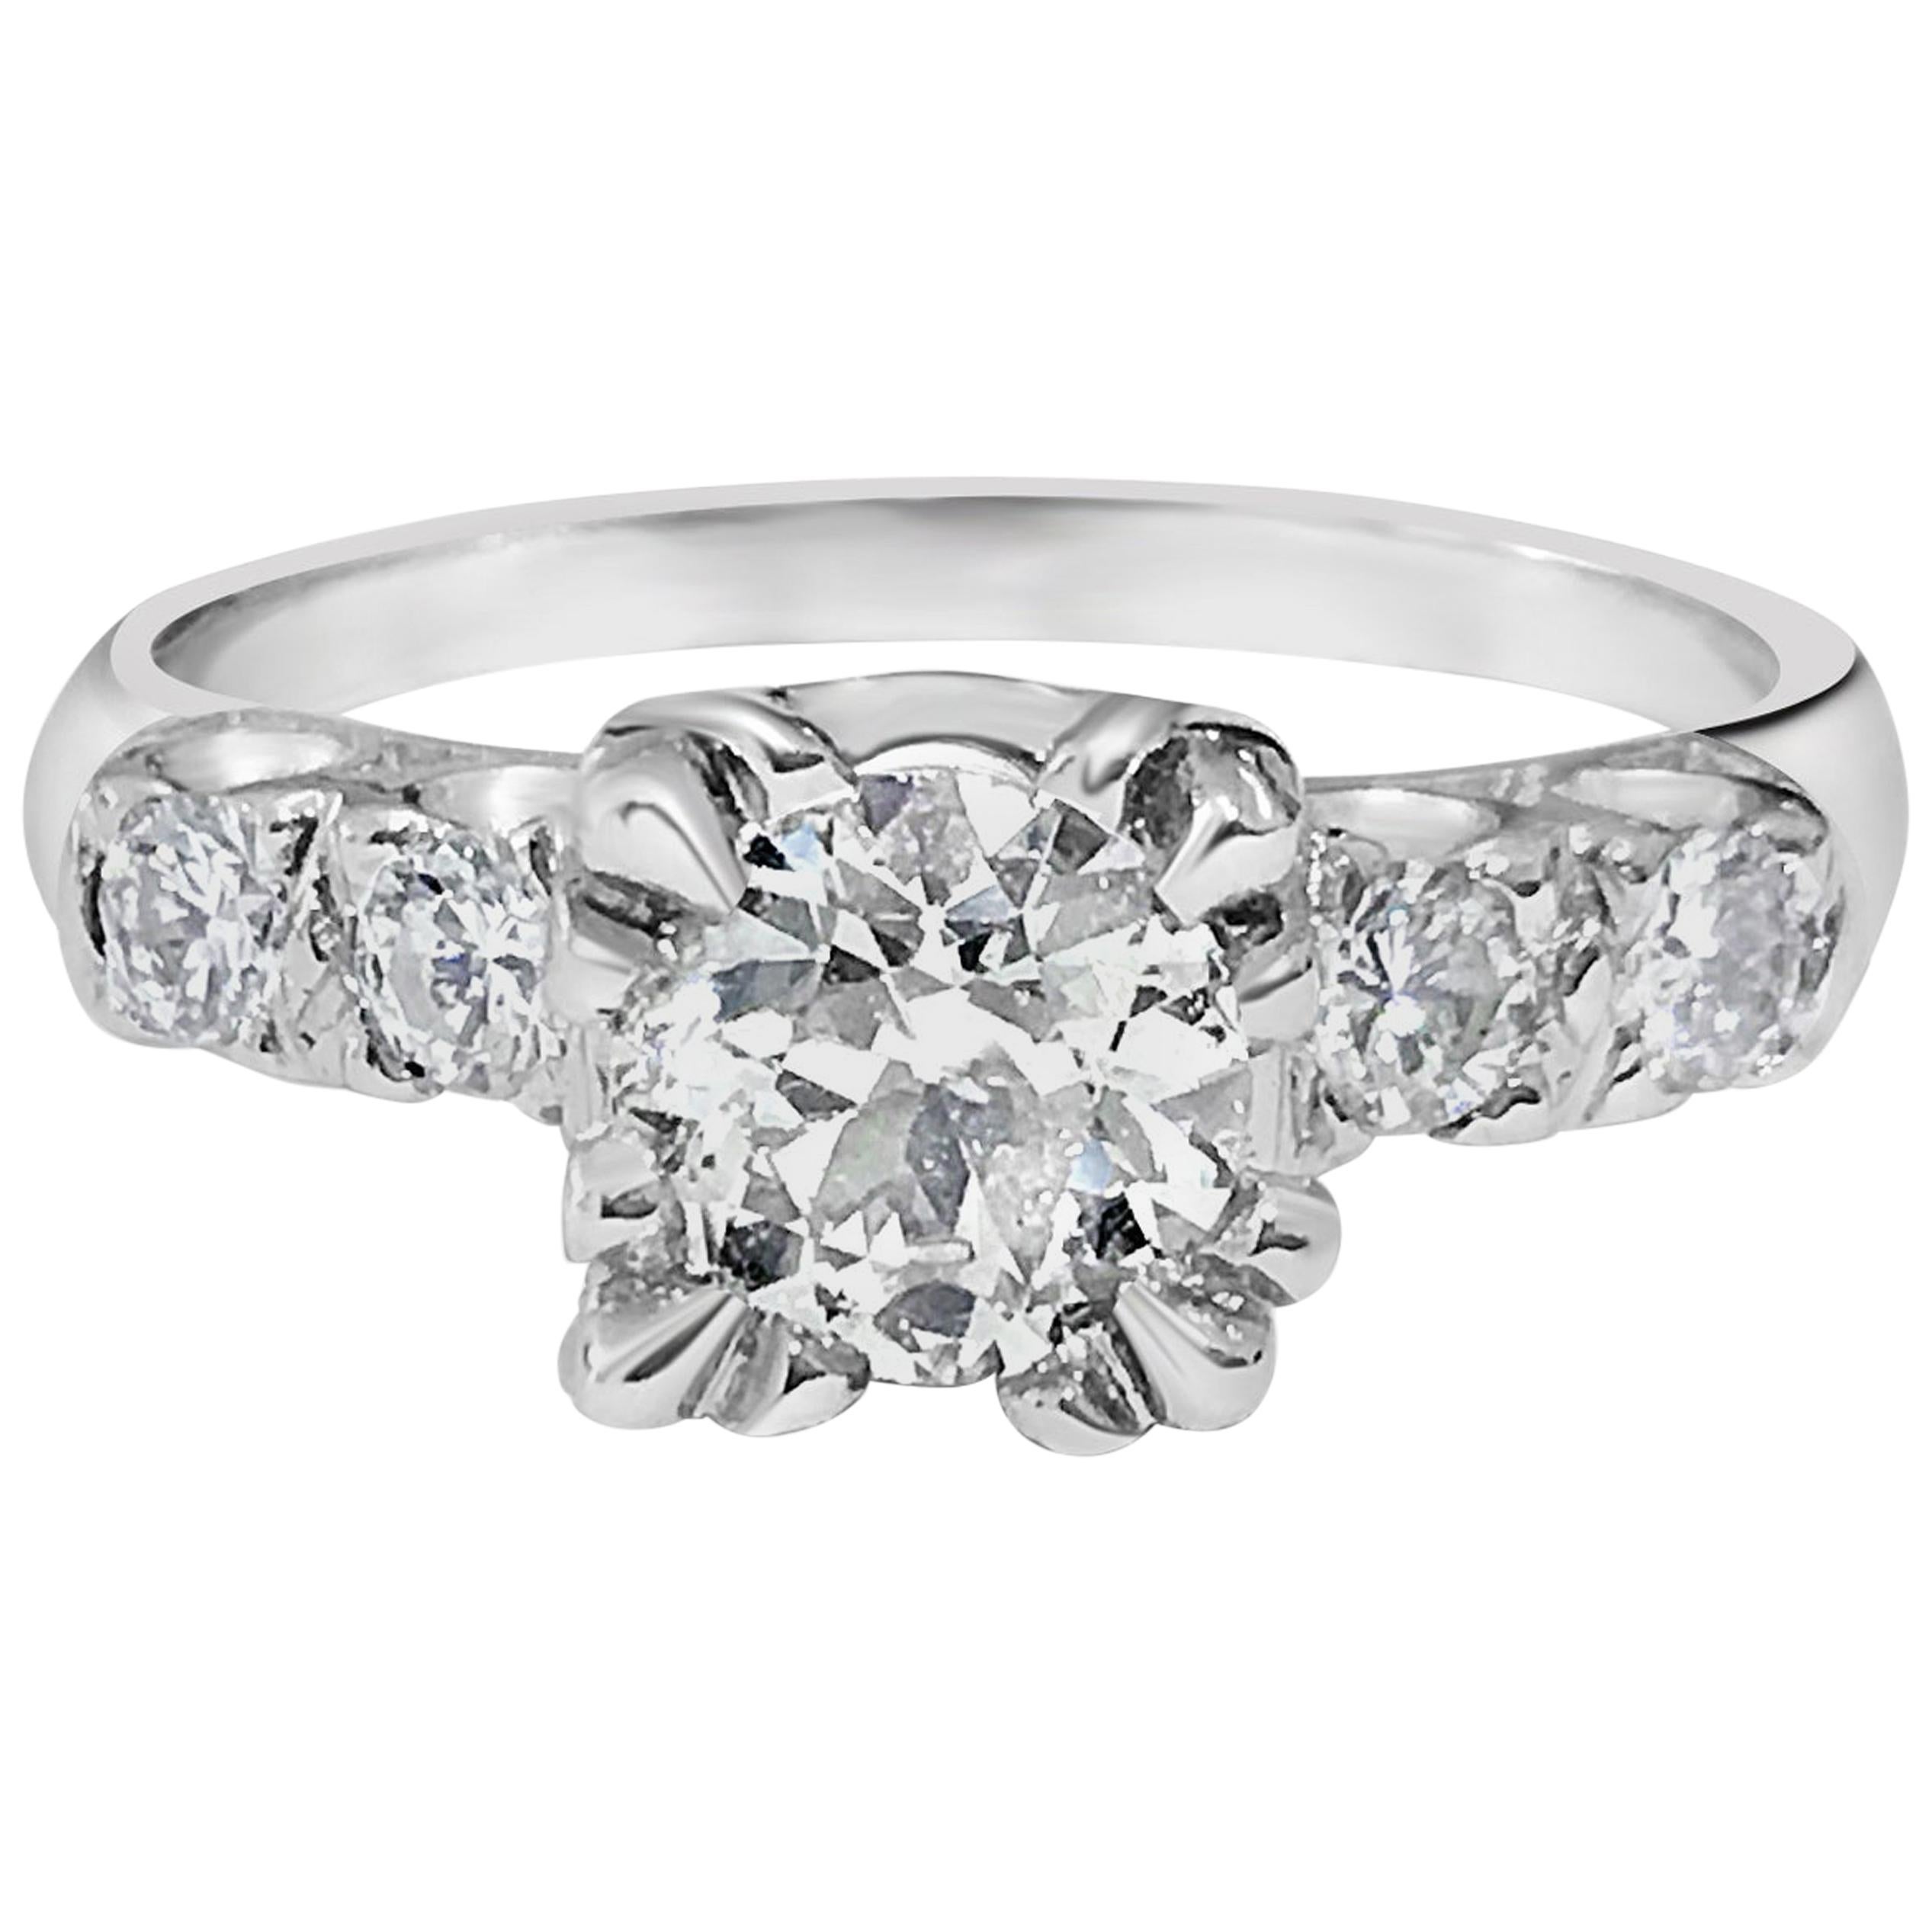 GIA Certified 1.35 Carat Diamond Engagement Ring For Sale